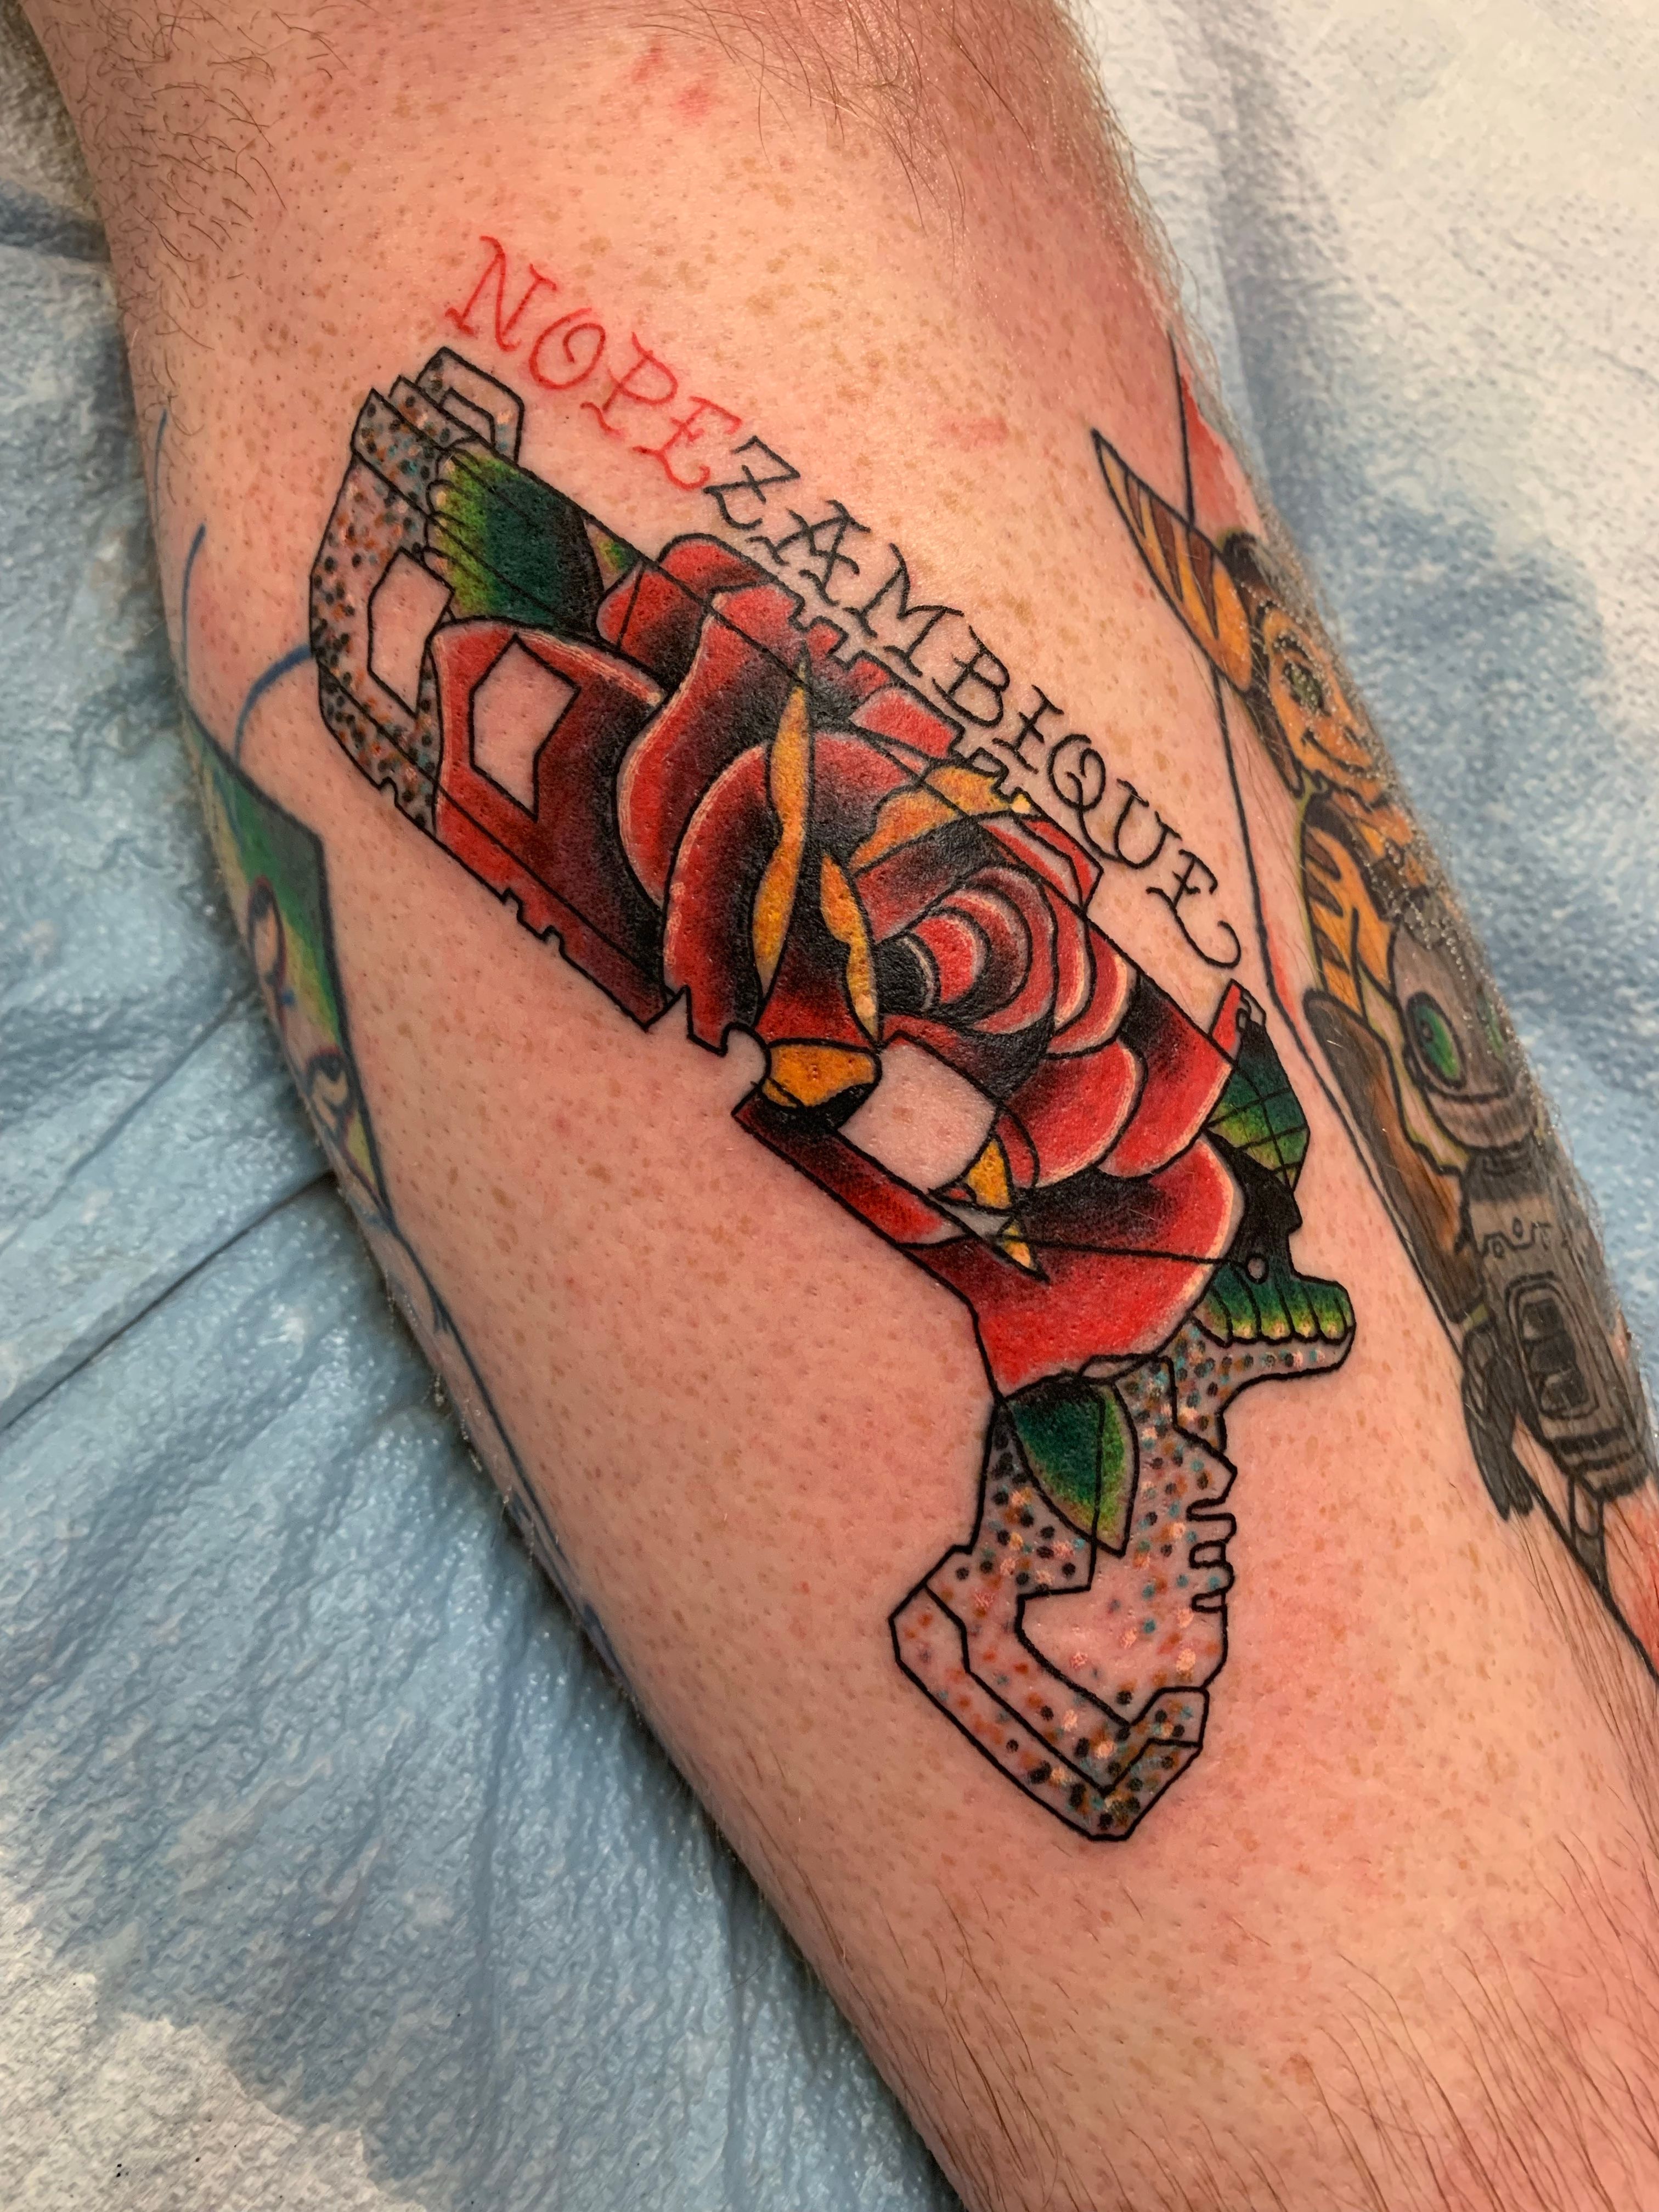 Tattoo uploaded by Gavin Grymes  Grim reaper on vacation done by Bradley  Brown in art collective tattoos in a Augusta GA  Tattoodo